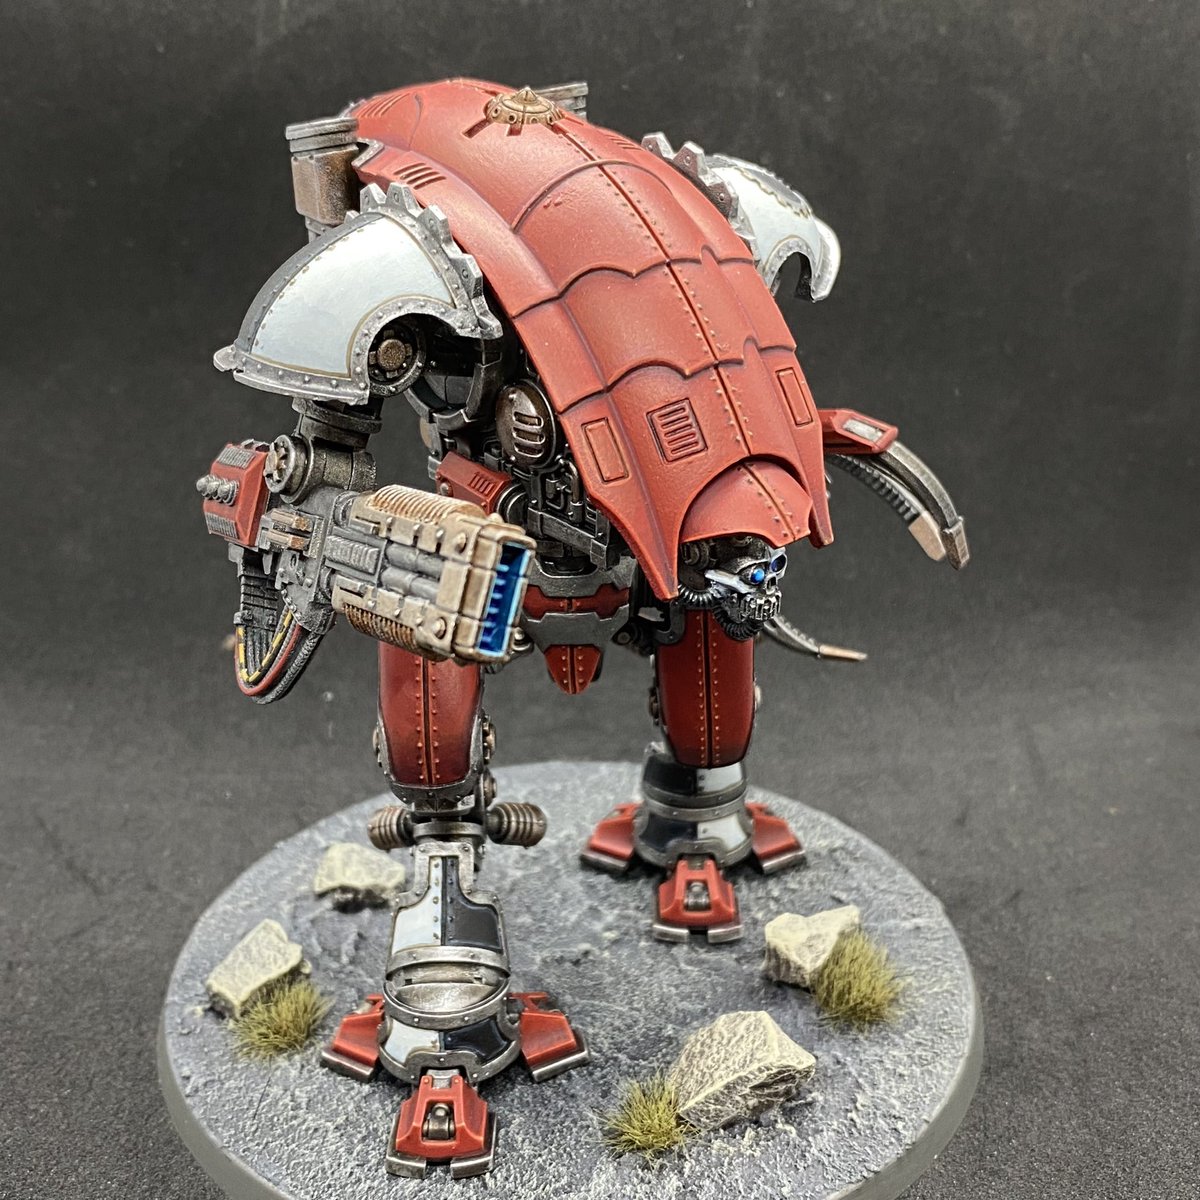 A Knight Moirax from House Taranis. A lovely kit to put together and paint. #paintingwarhammer #warhammercommunity #knights #taranis  #housetaranis #gamesworkshop #mechanicum